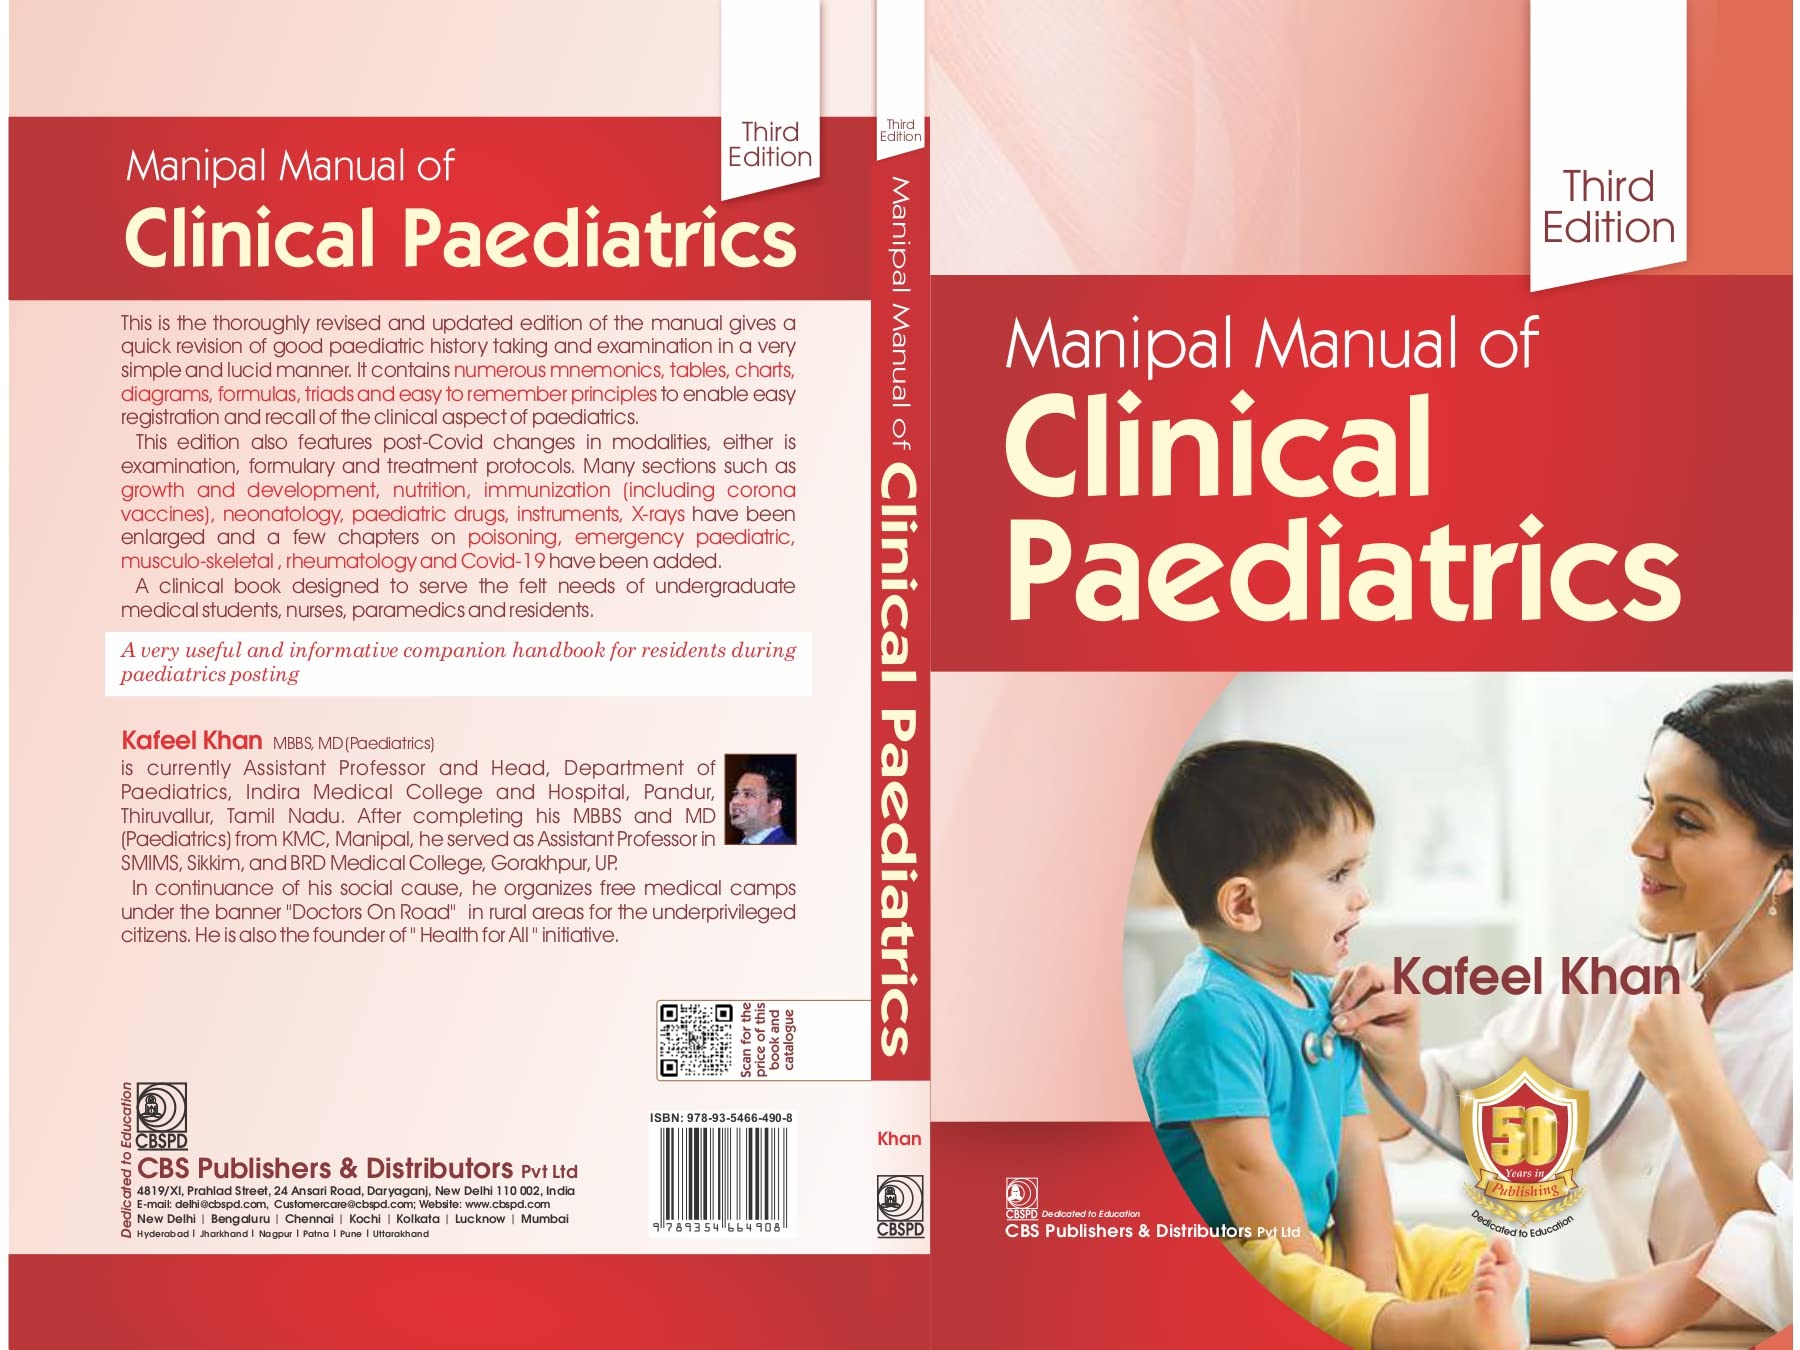 Manipal Manual of Clinical Paediatrics 3rd Edition